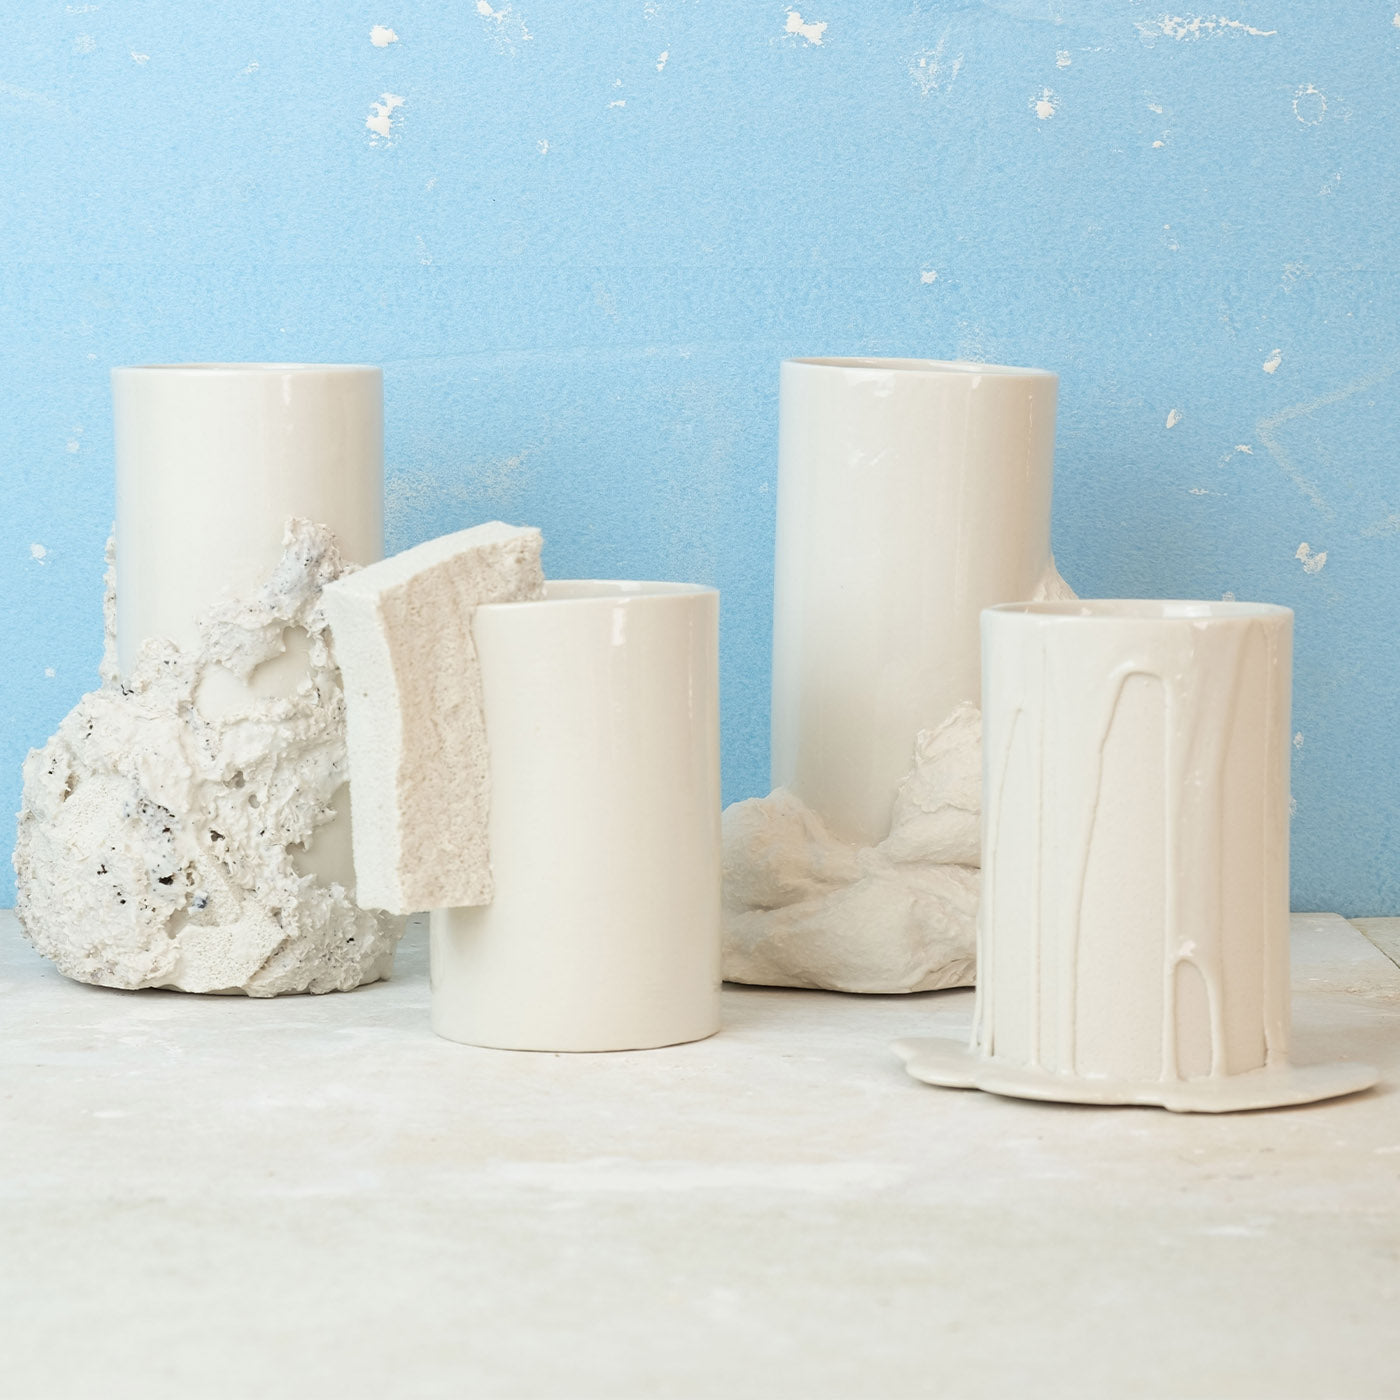 Set Of 4 Vases With Sponges And Lichens By Patricia Urquiola - Alternative view 1